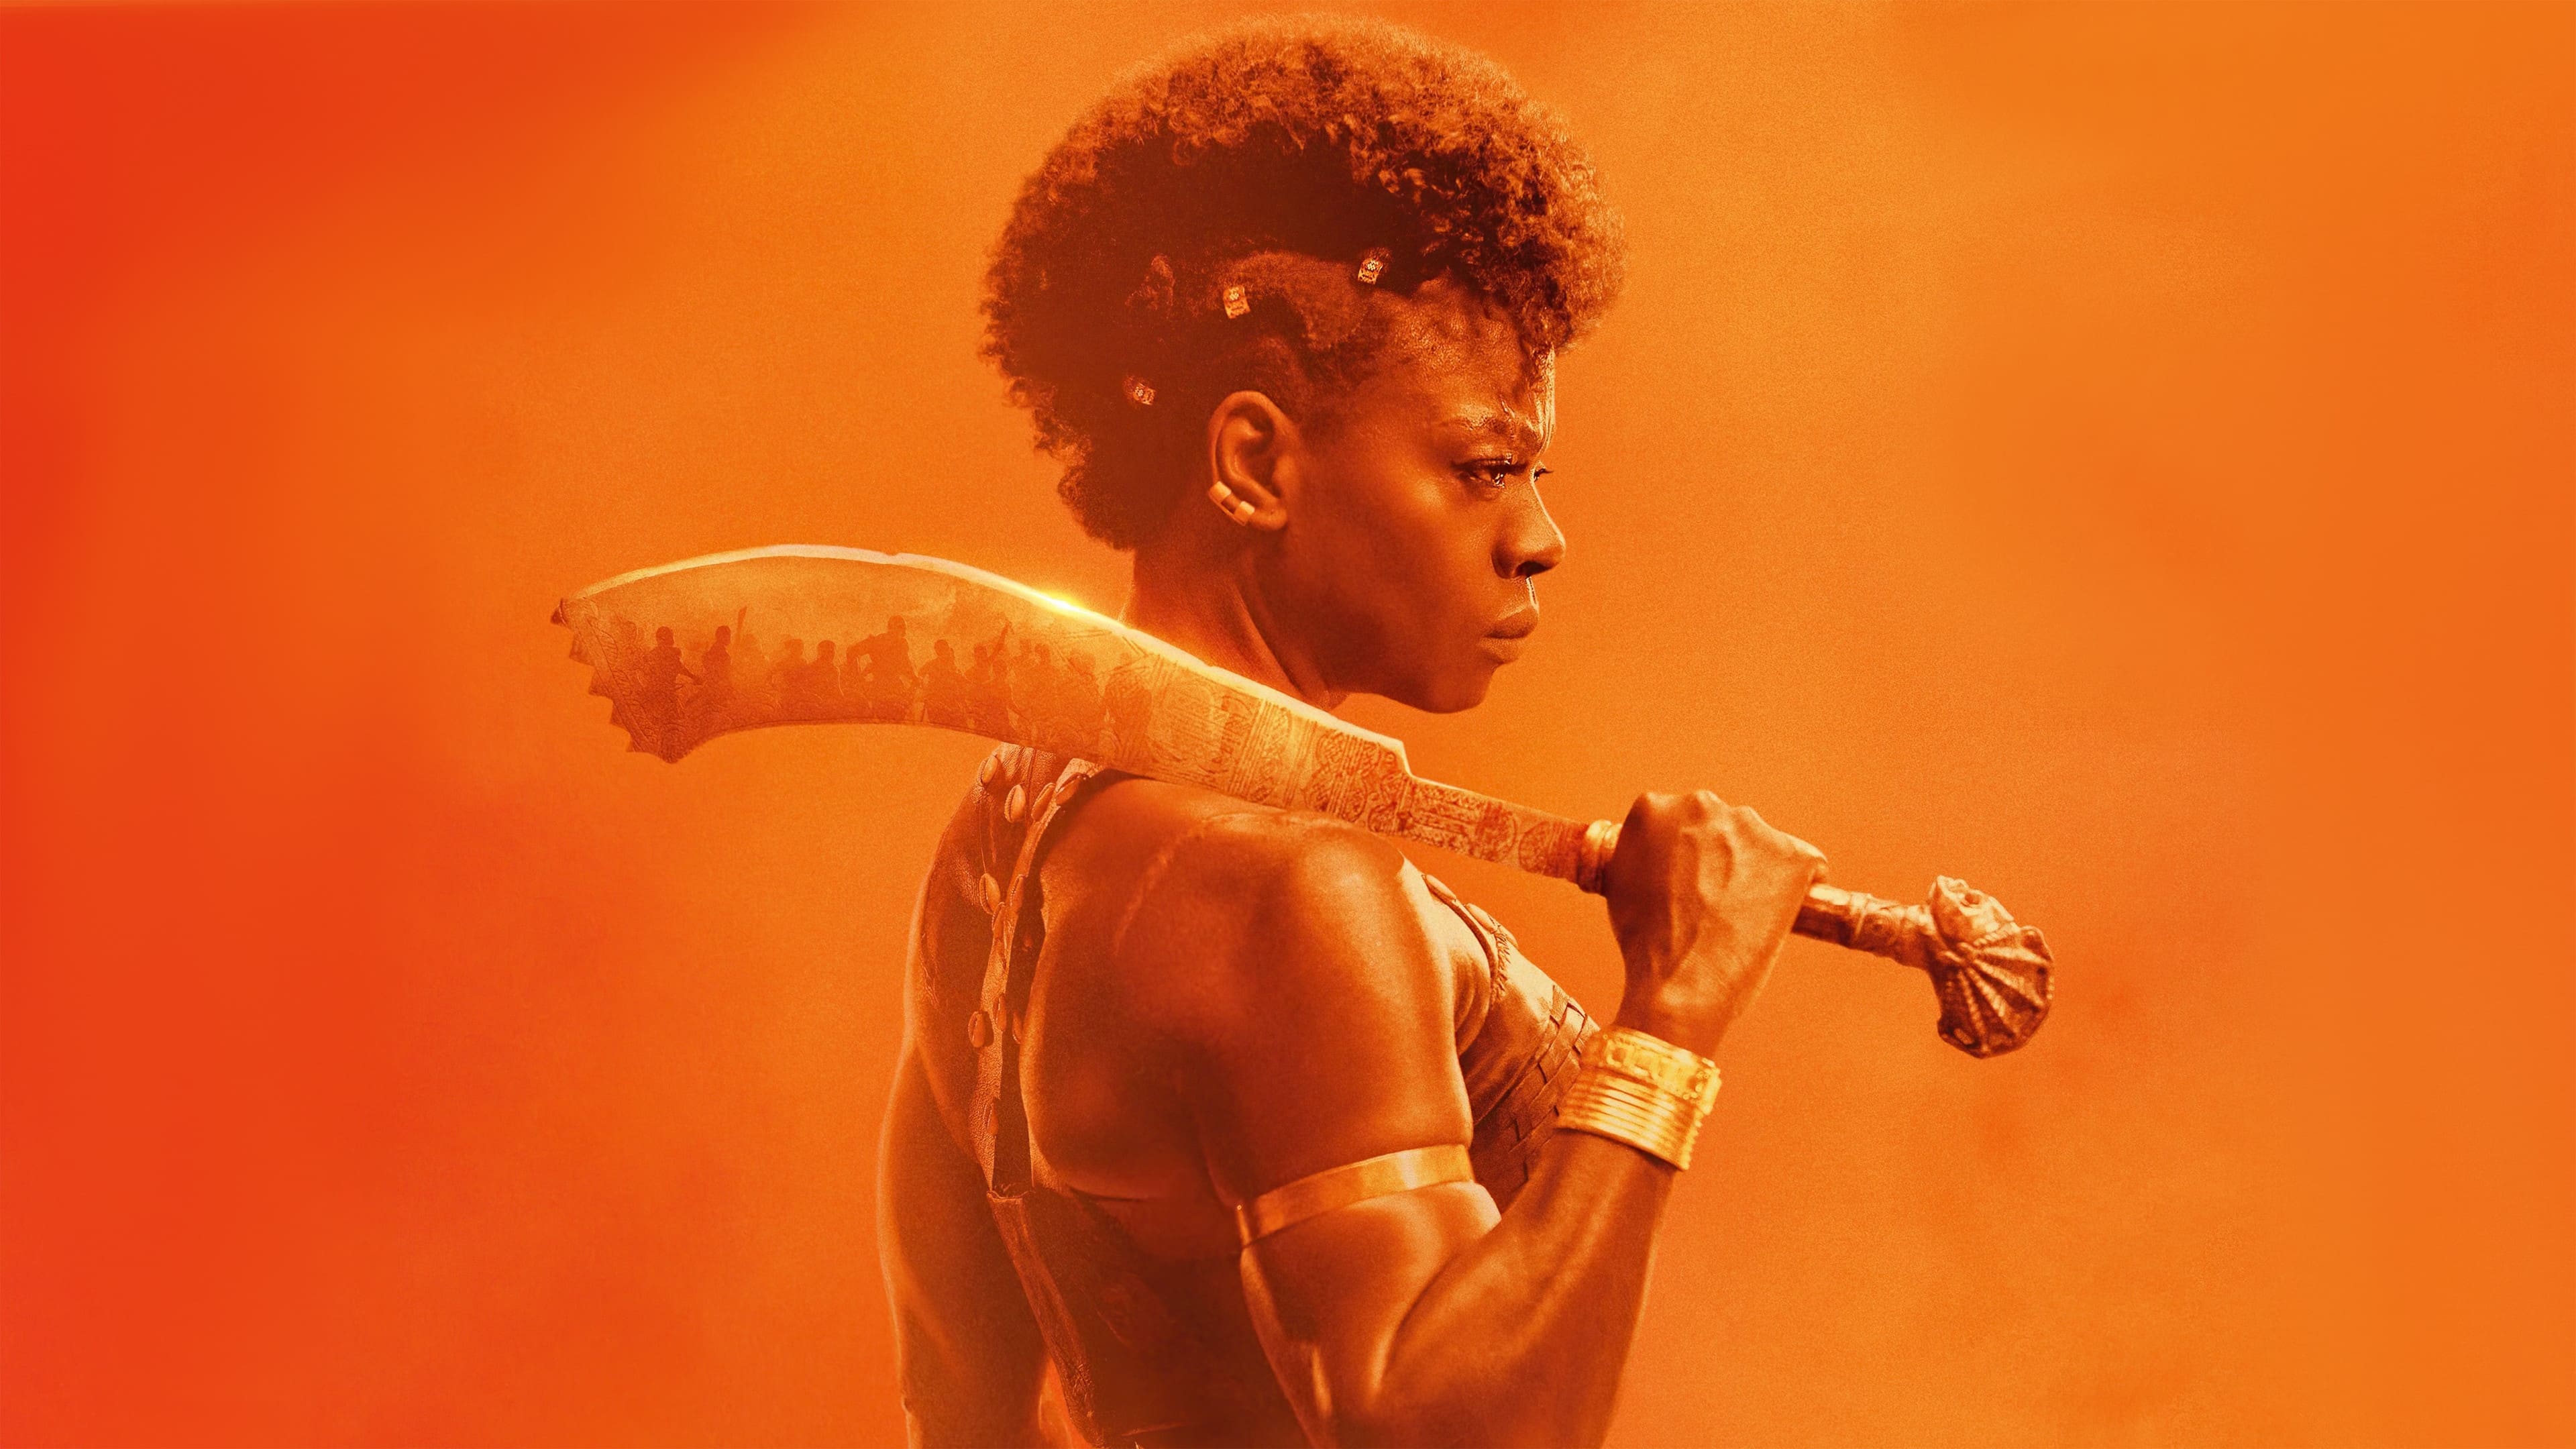 A promotional image for The Woman King shows the titular character against an orange background.